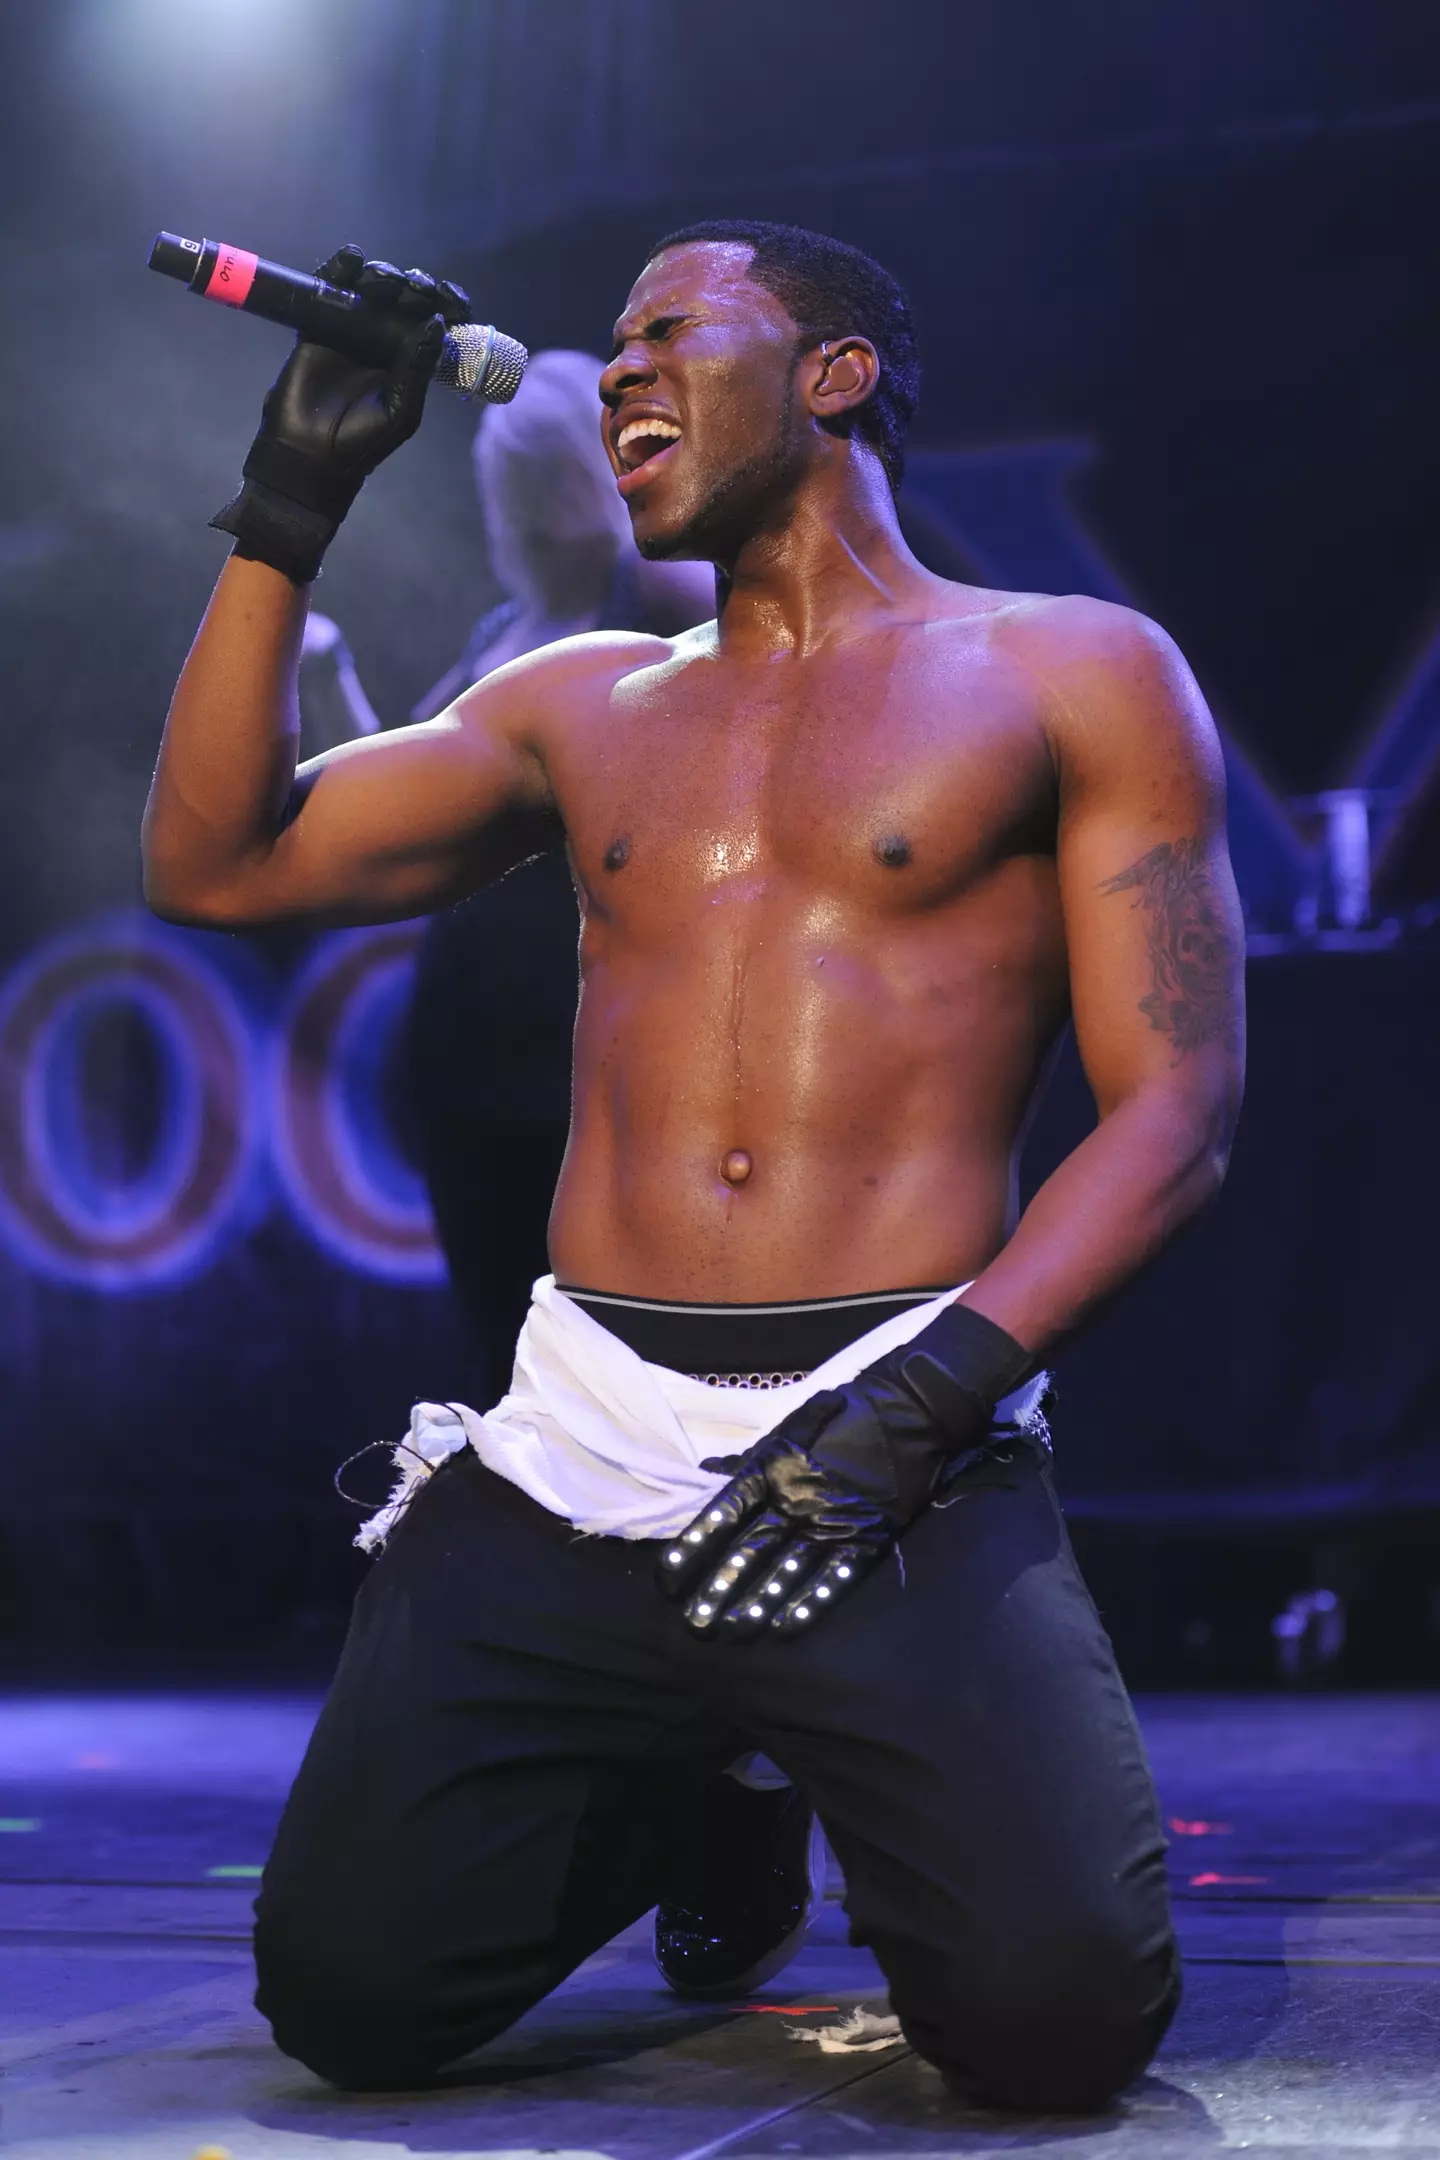 Jason Derulo has been singing his own name since the start of his career.